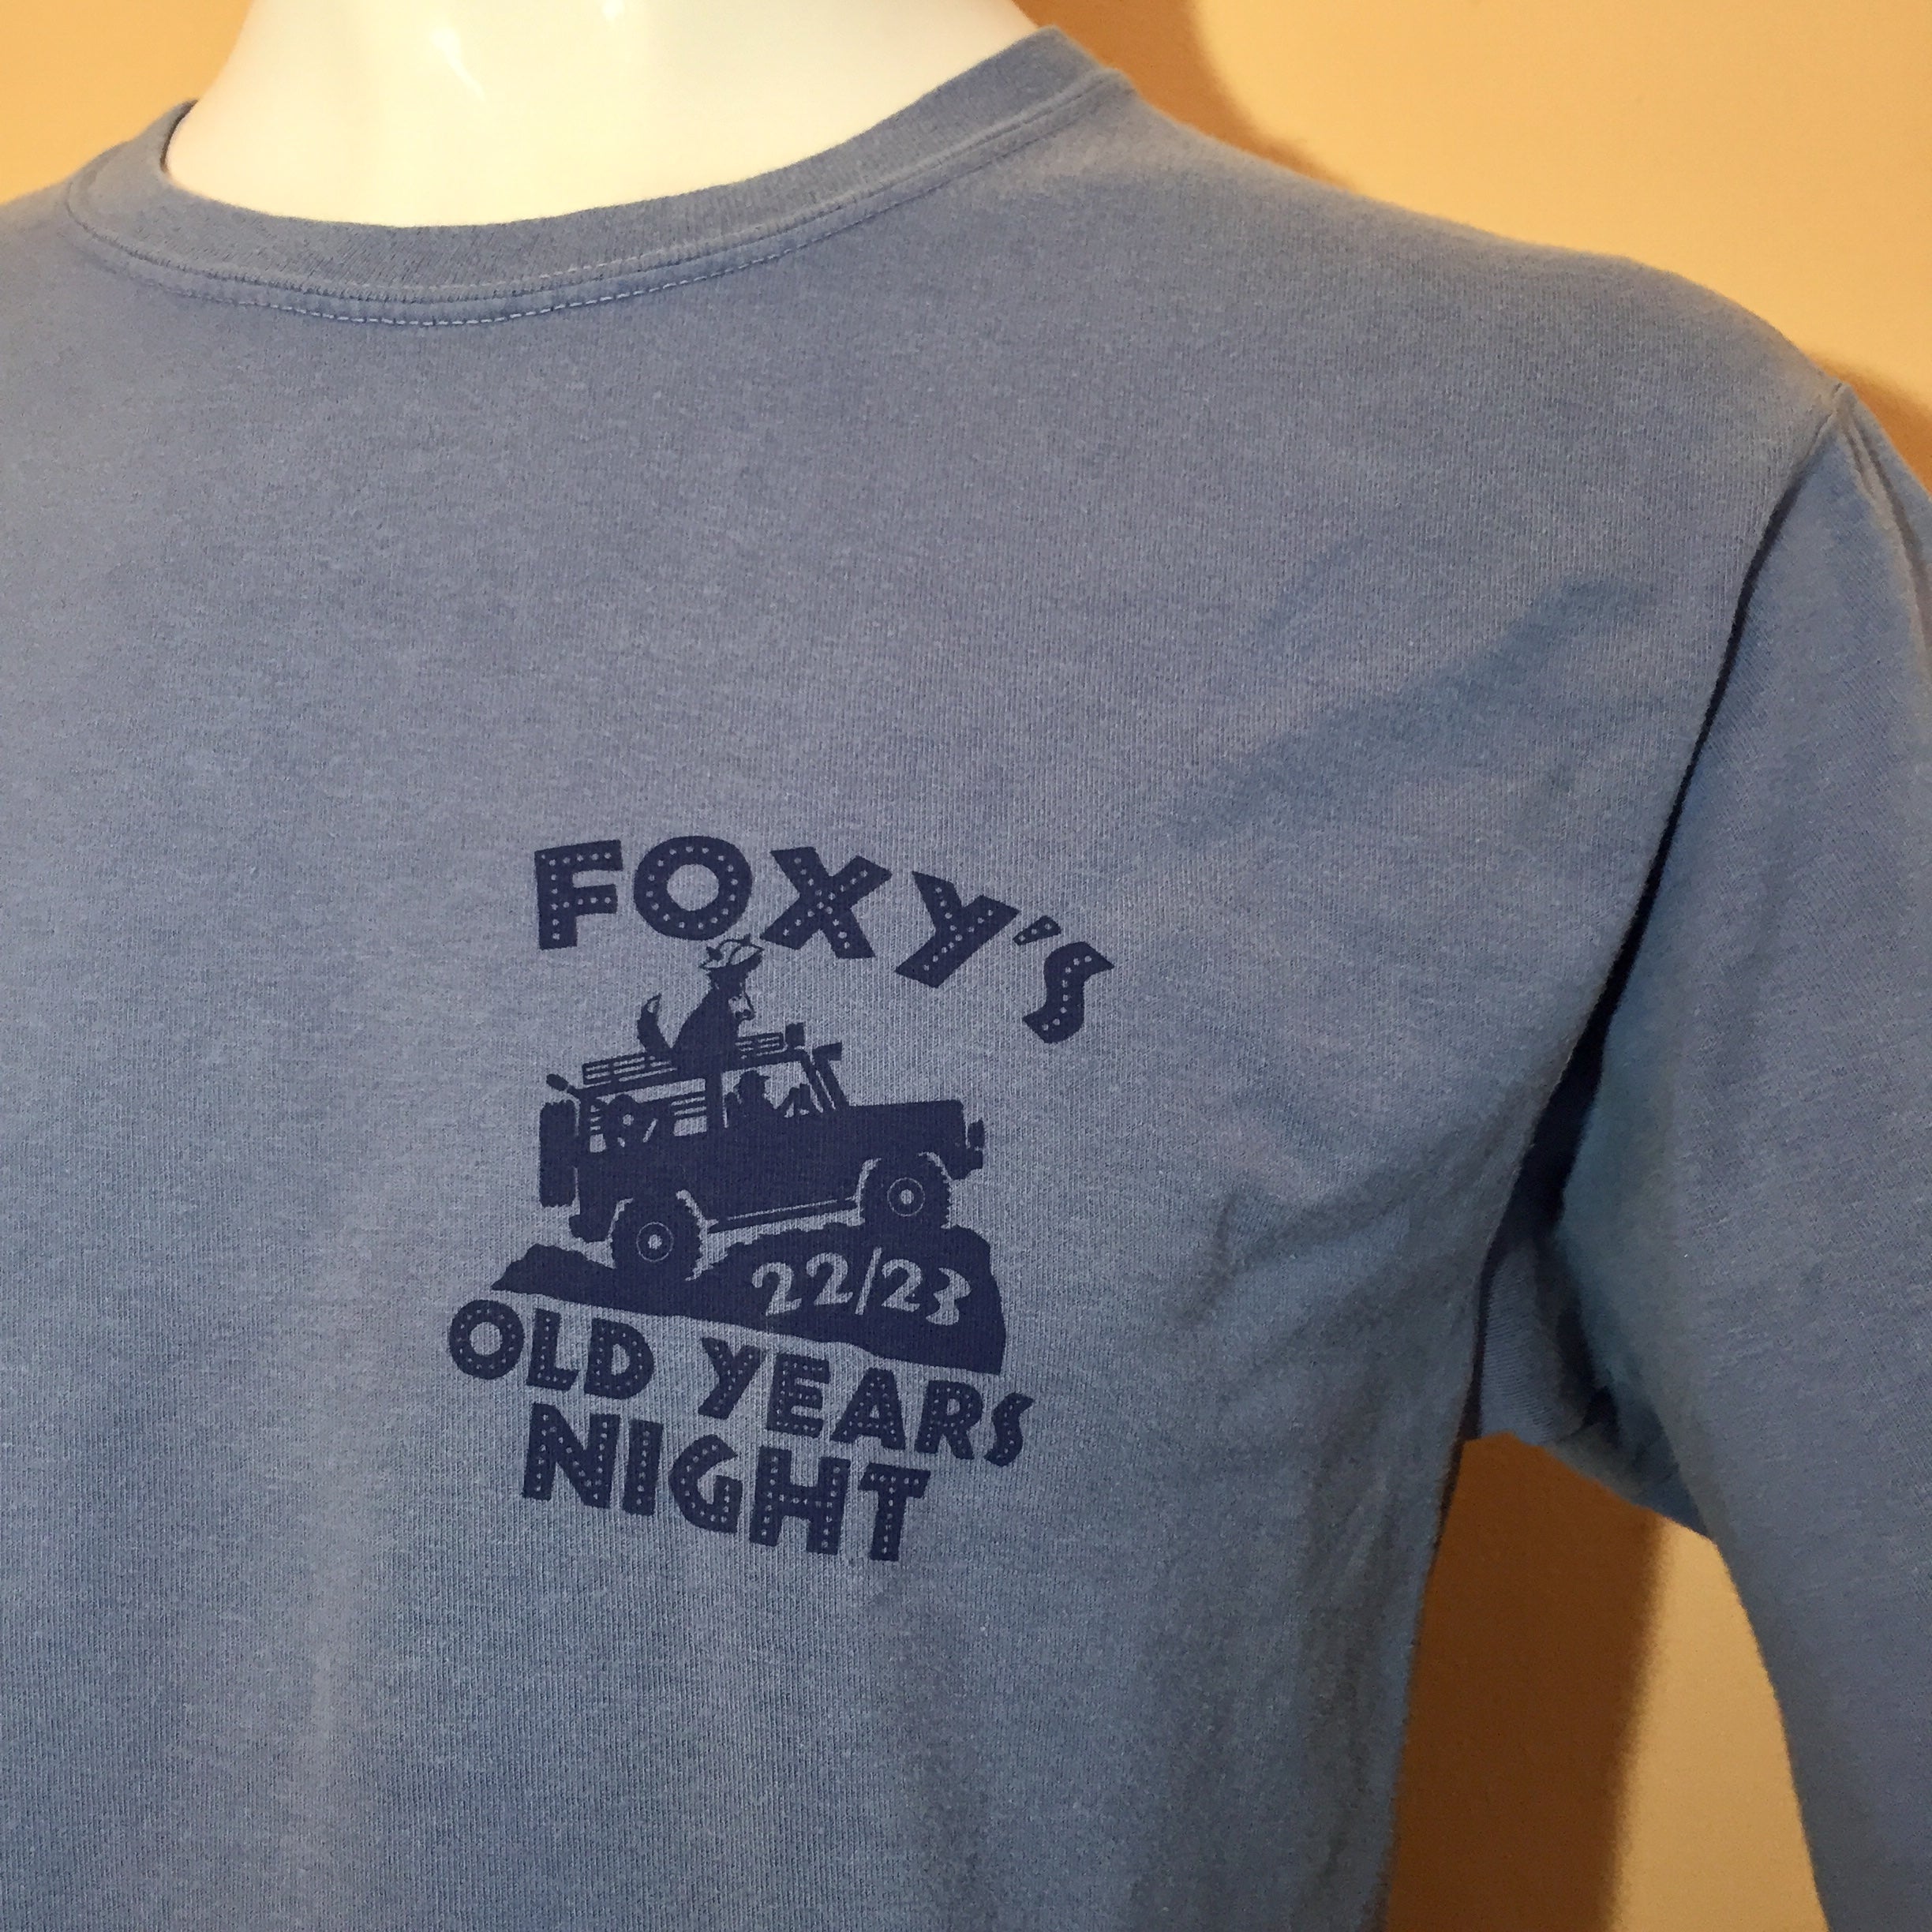 SALE Foxy's Old Year's Night Event Tee 22-23 'African Safari' Long Sleeve from Flying Fish